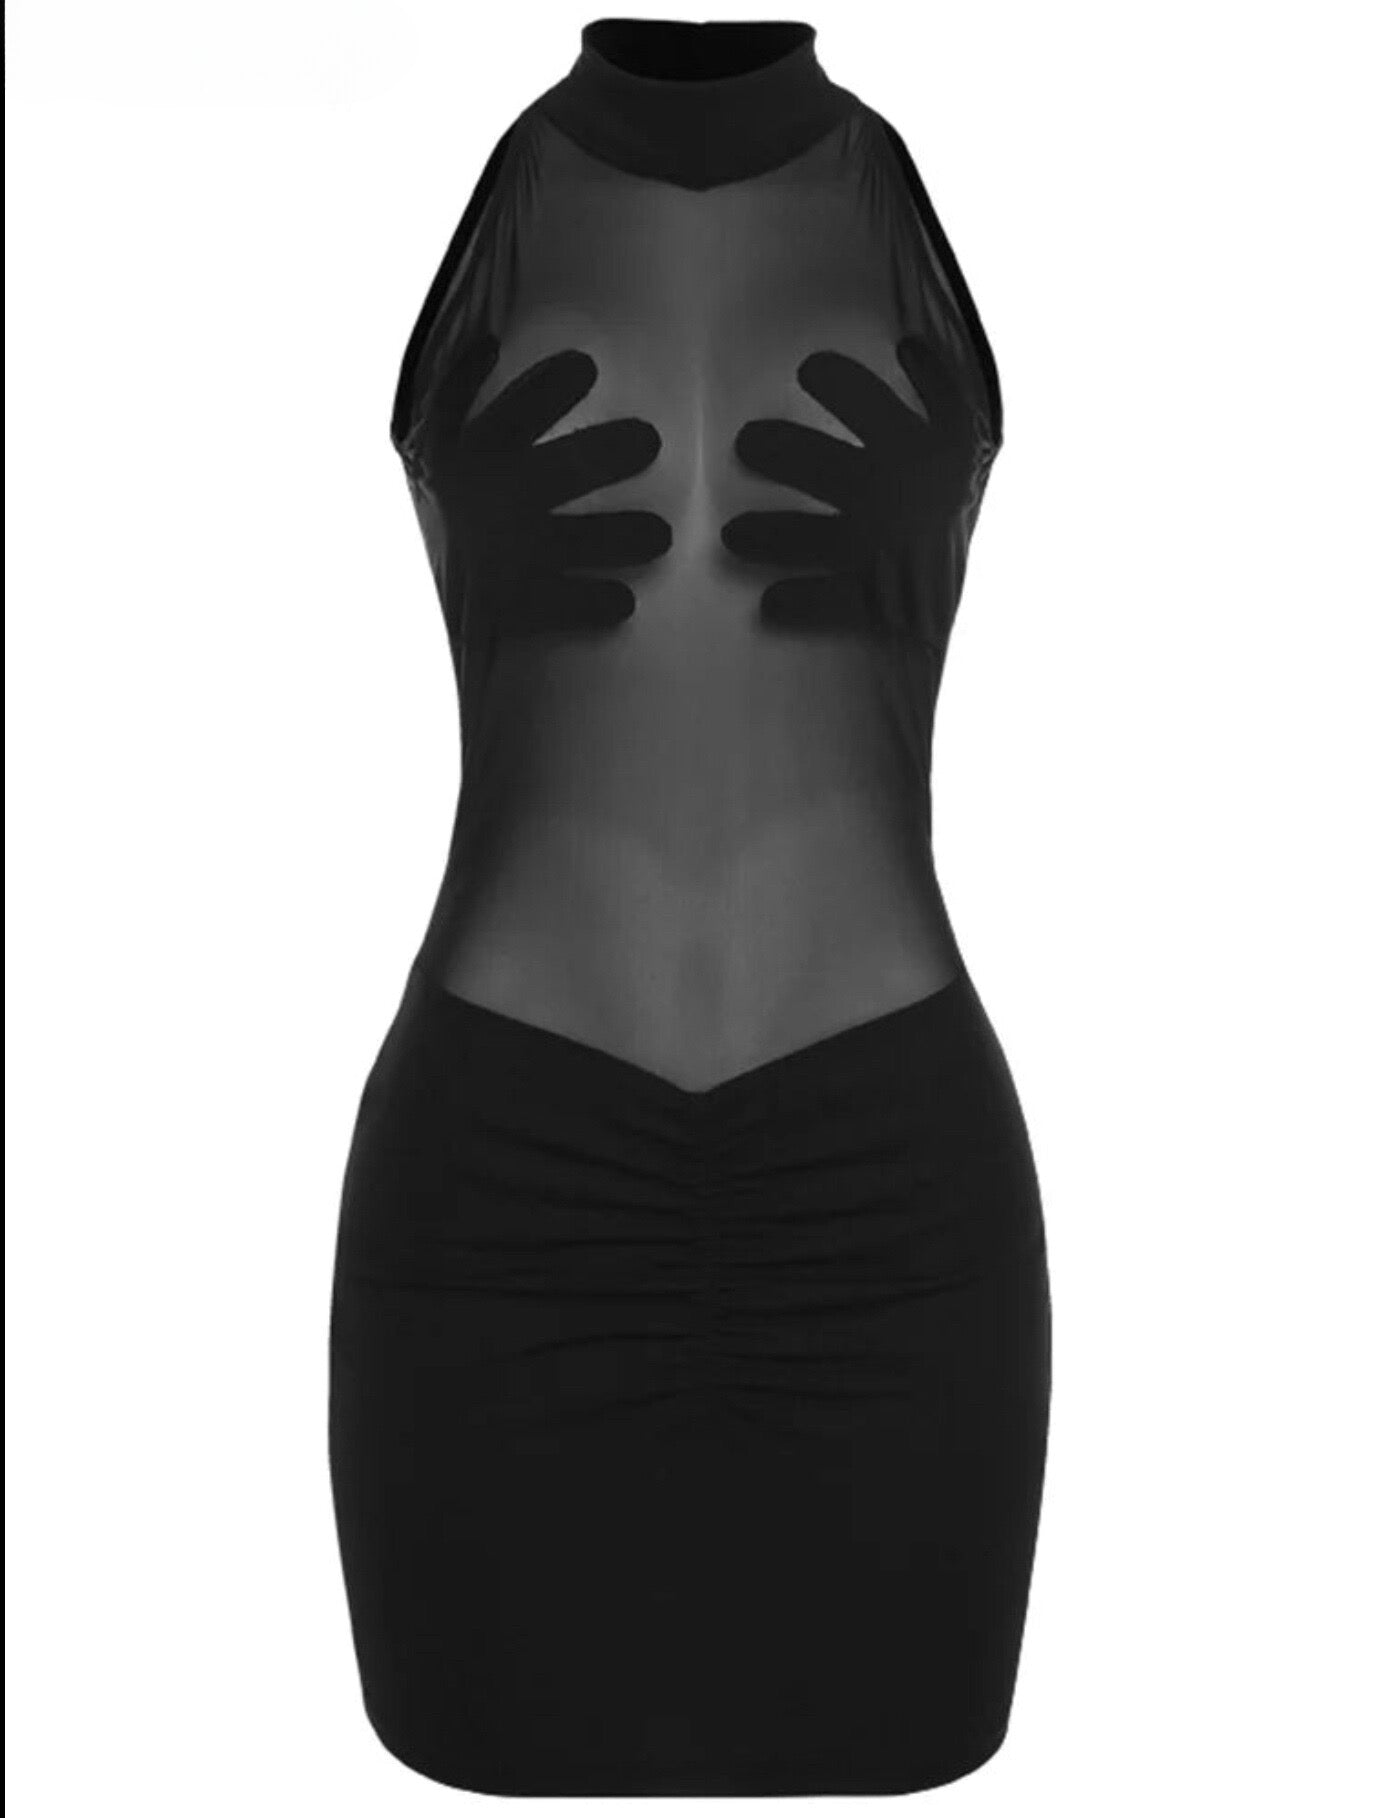 &quot;T-BOO Women Handprint Mesh Dress: Round Neck Sexy Patchwork Sleeveless Bodycon Stretchy Skinny Midnight Party Clubwear&quot;